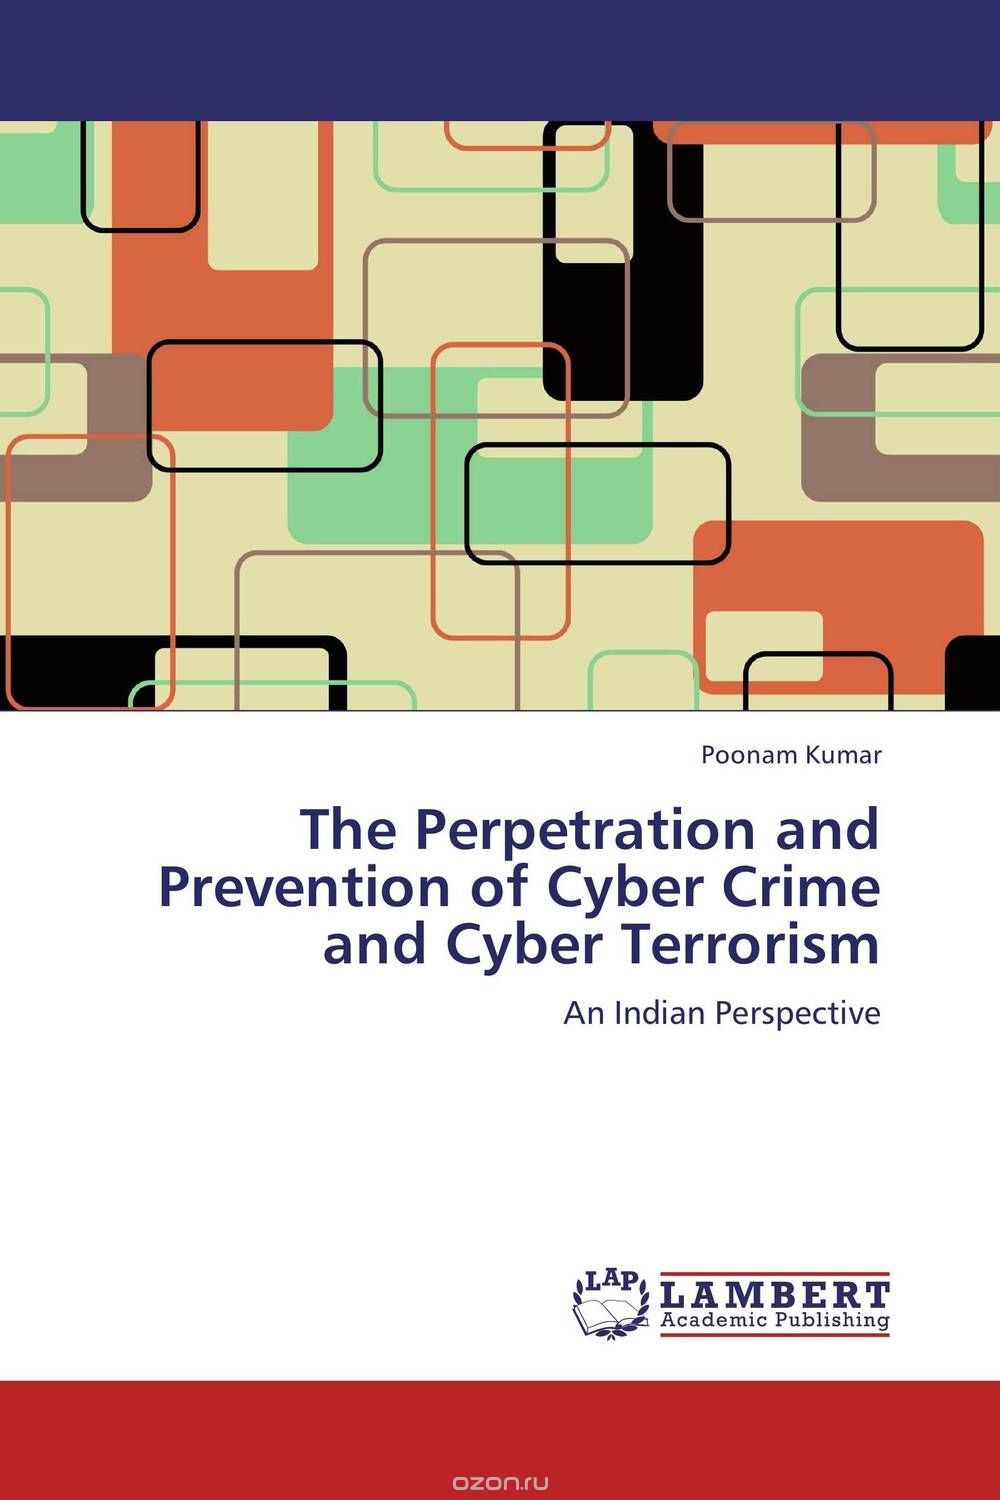 The Perpetration and Prevention of Cyber Crime and Cyber Terrorism